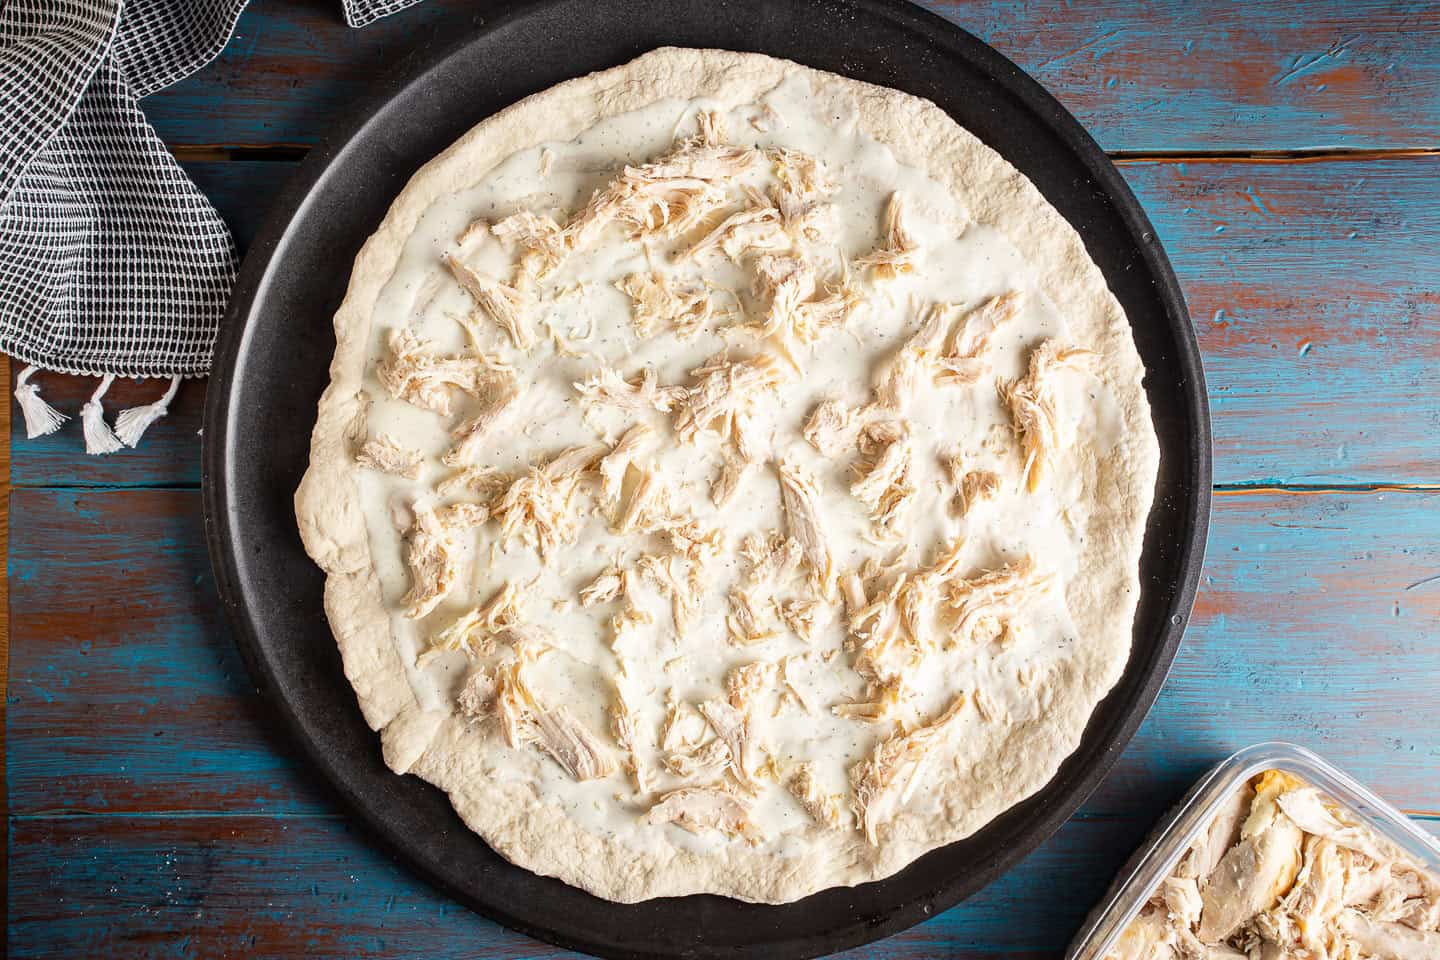 Topping pizza with cooked shredded chicken.